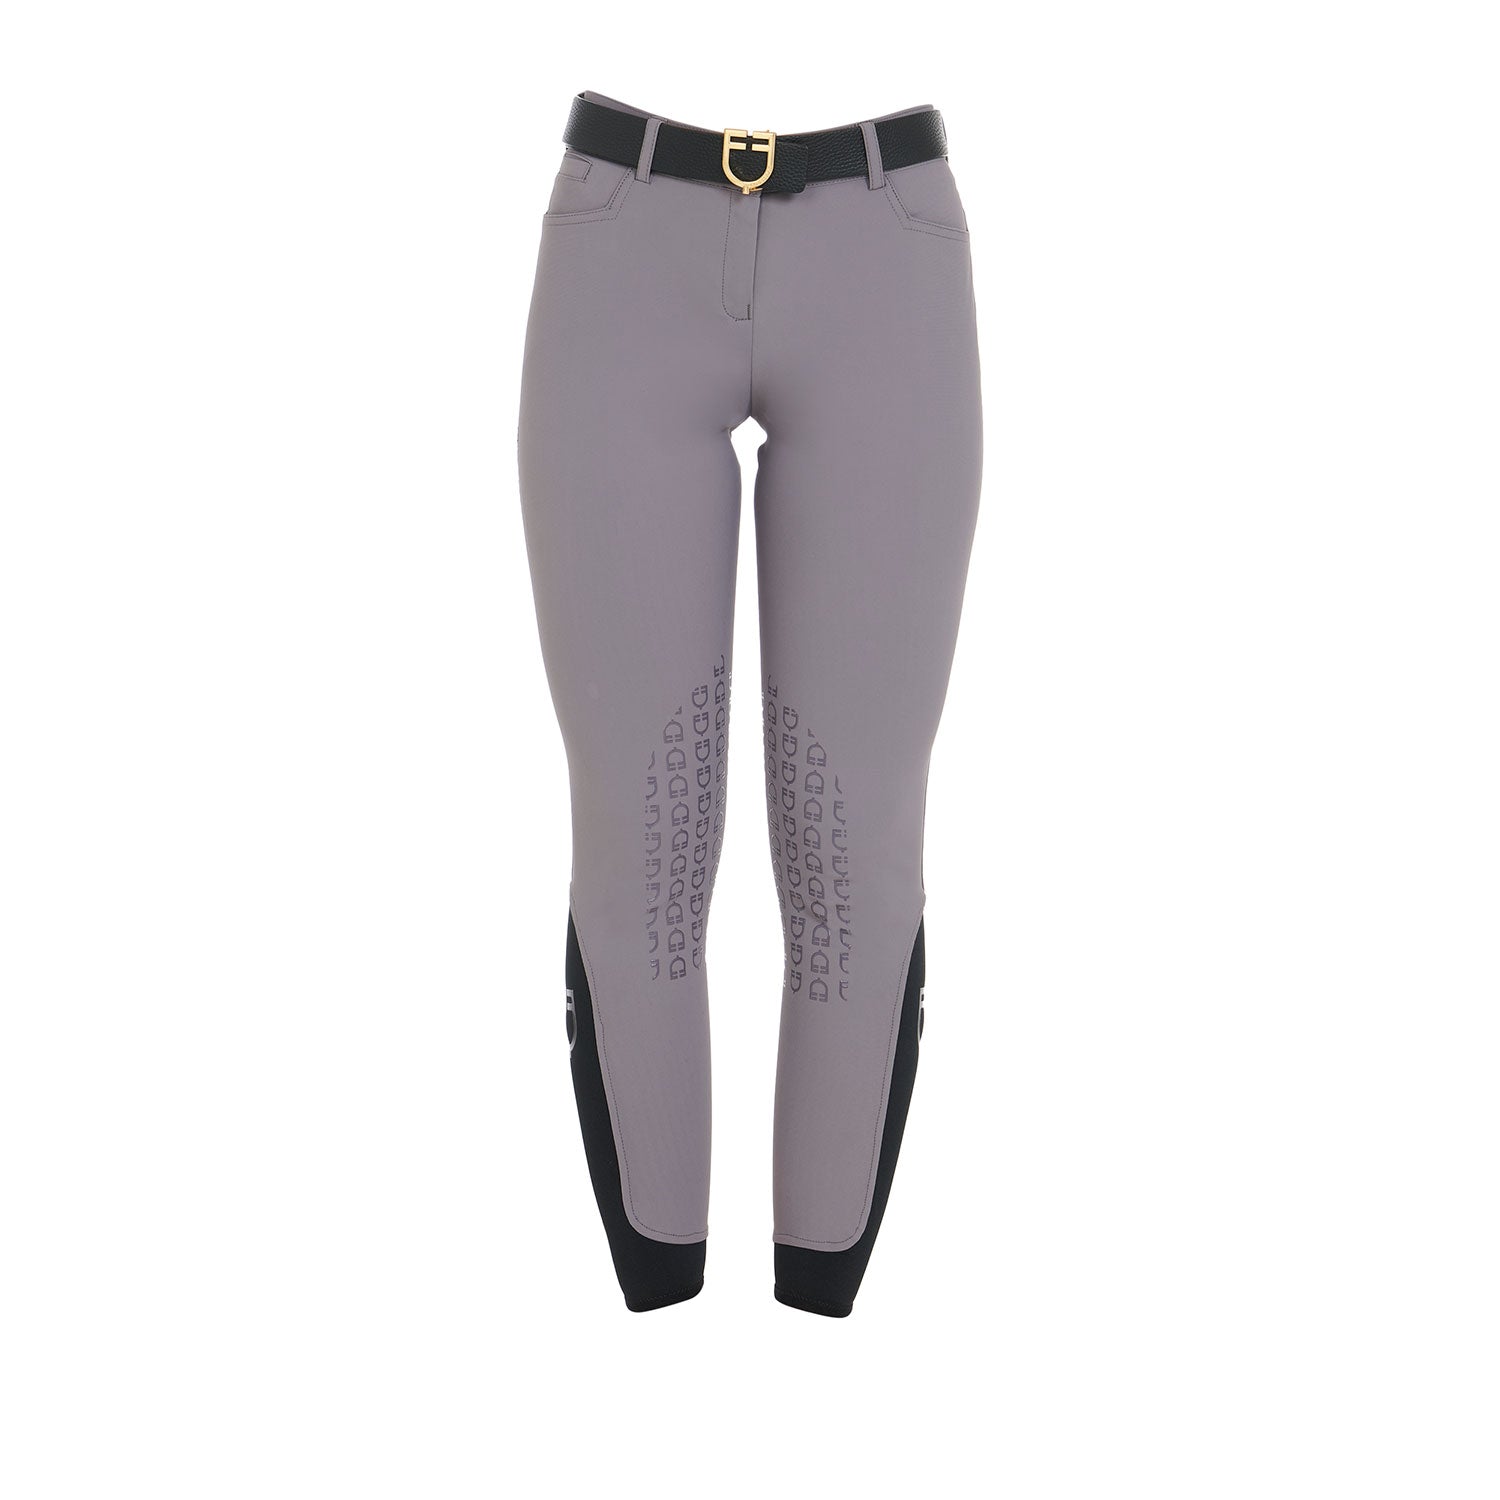 Light grey competition breeches with knee patches